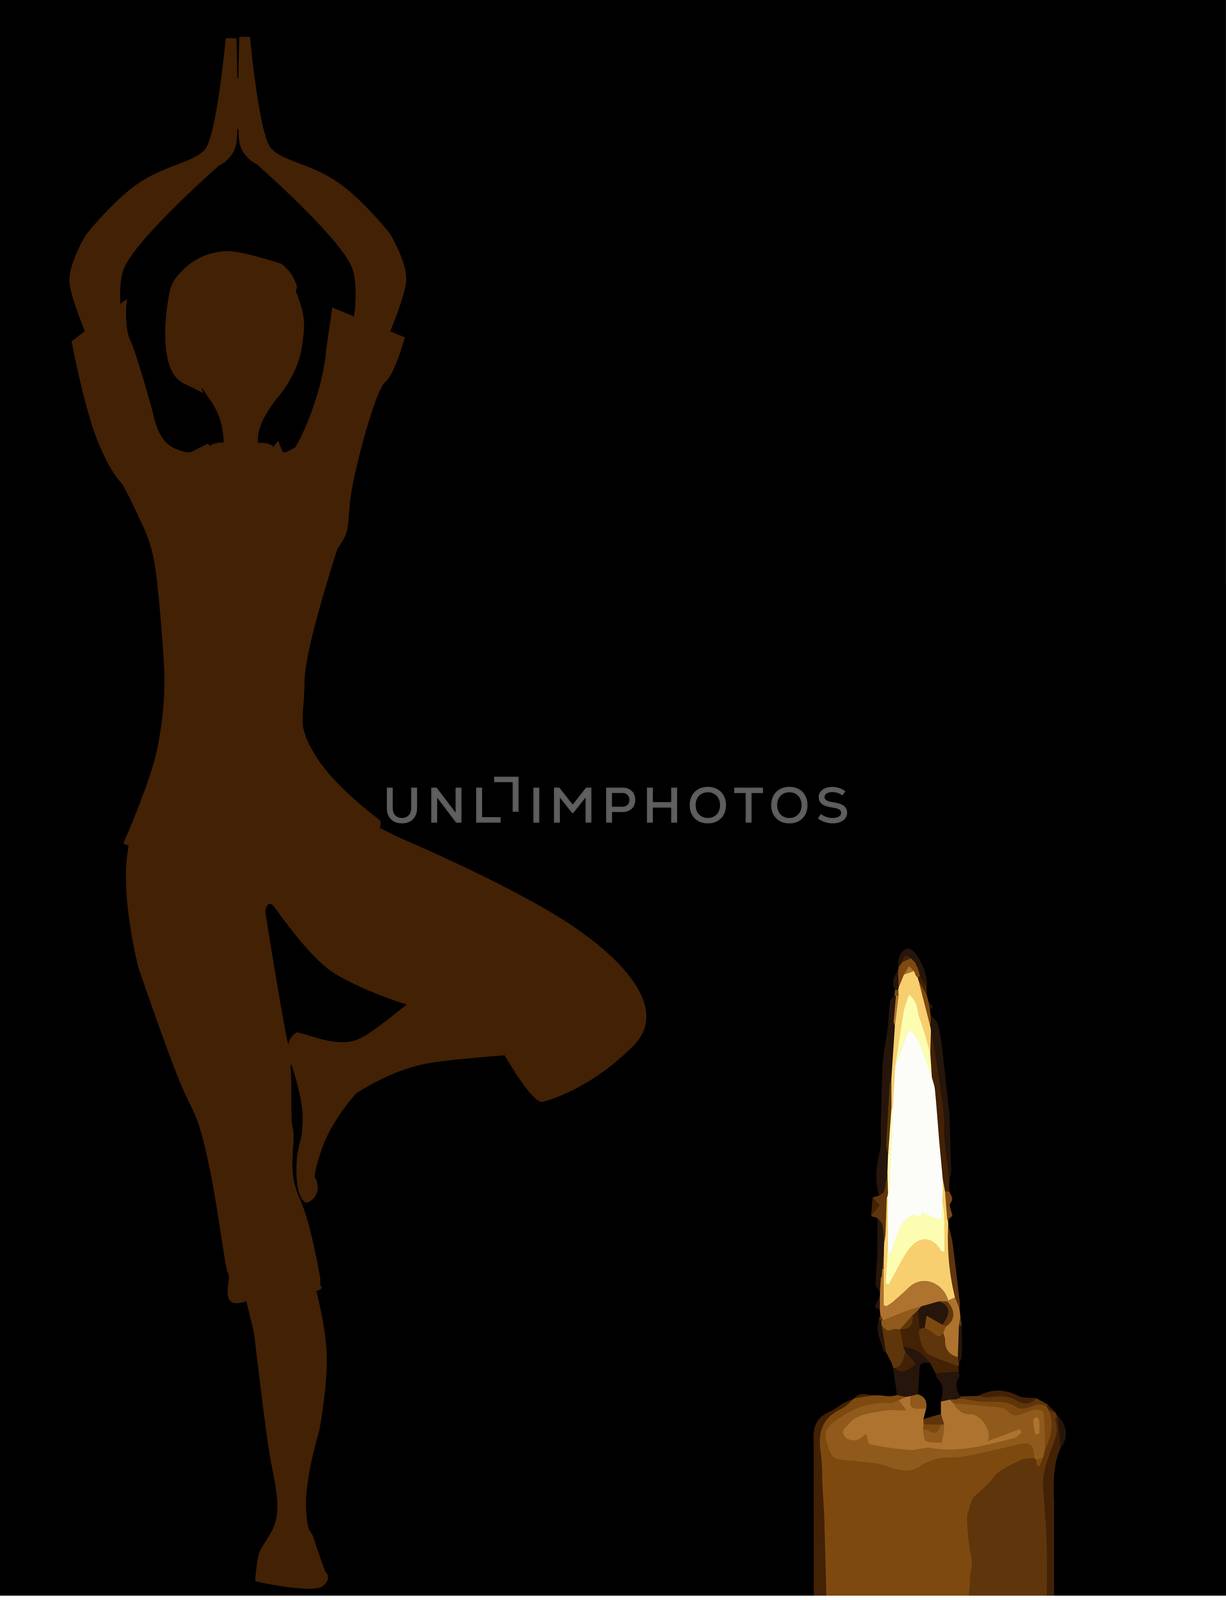 A yoga practitioner behind a flickering candle